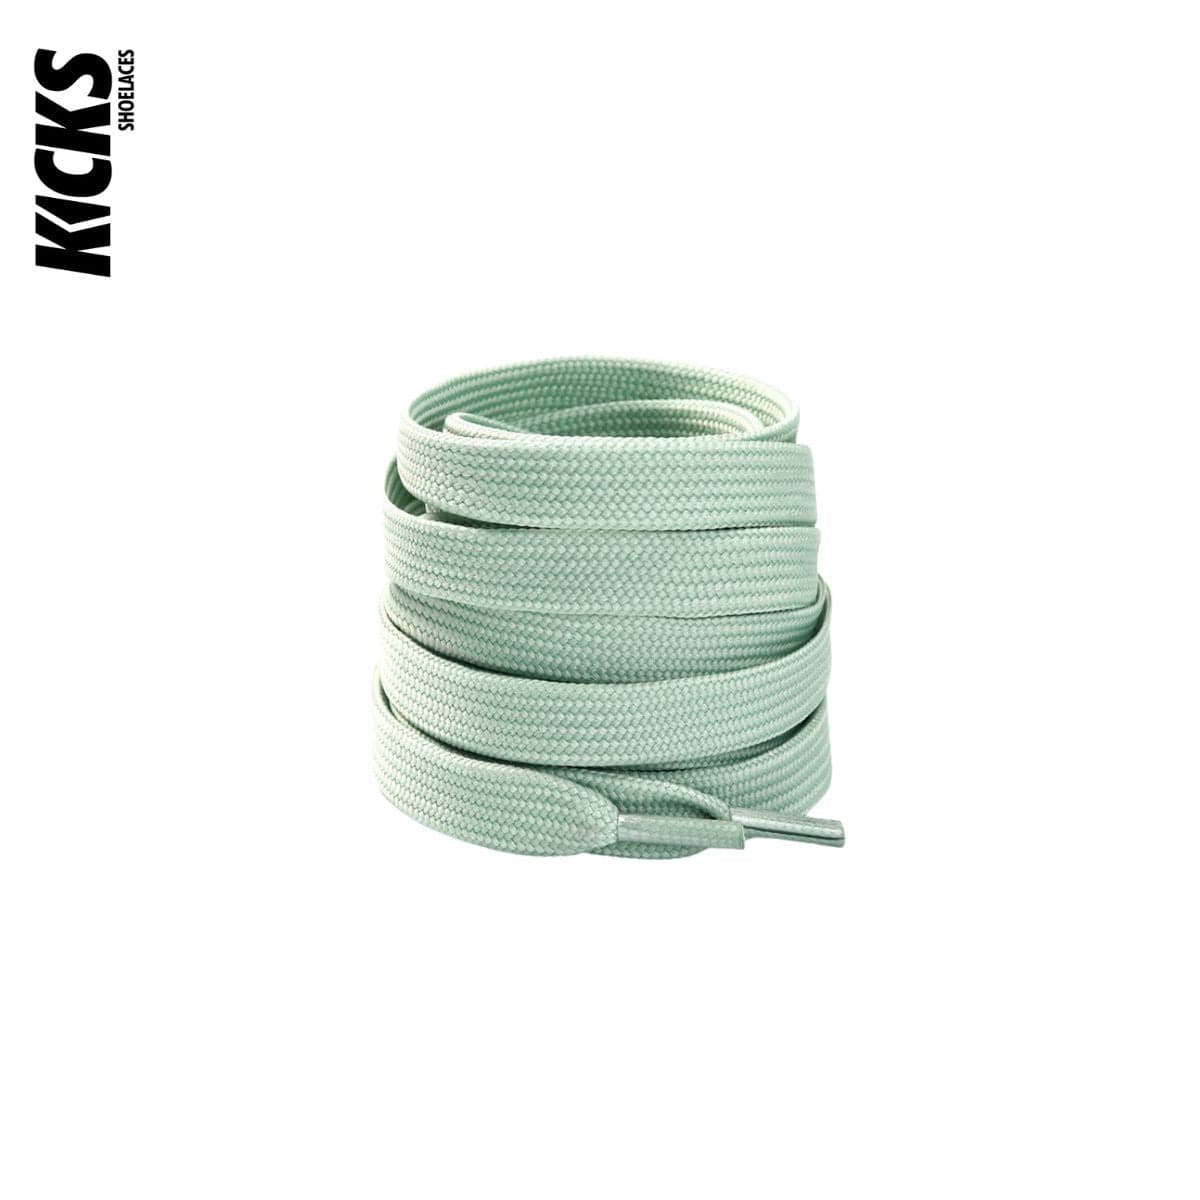 Pastel Green Replacement Laces for Adidas EQT Sneakers by Kicks Shoelaces